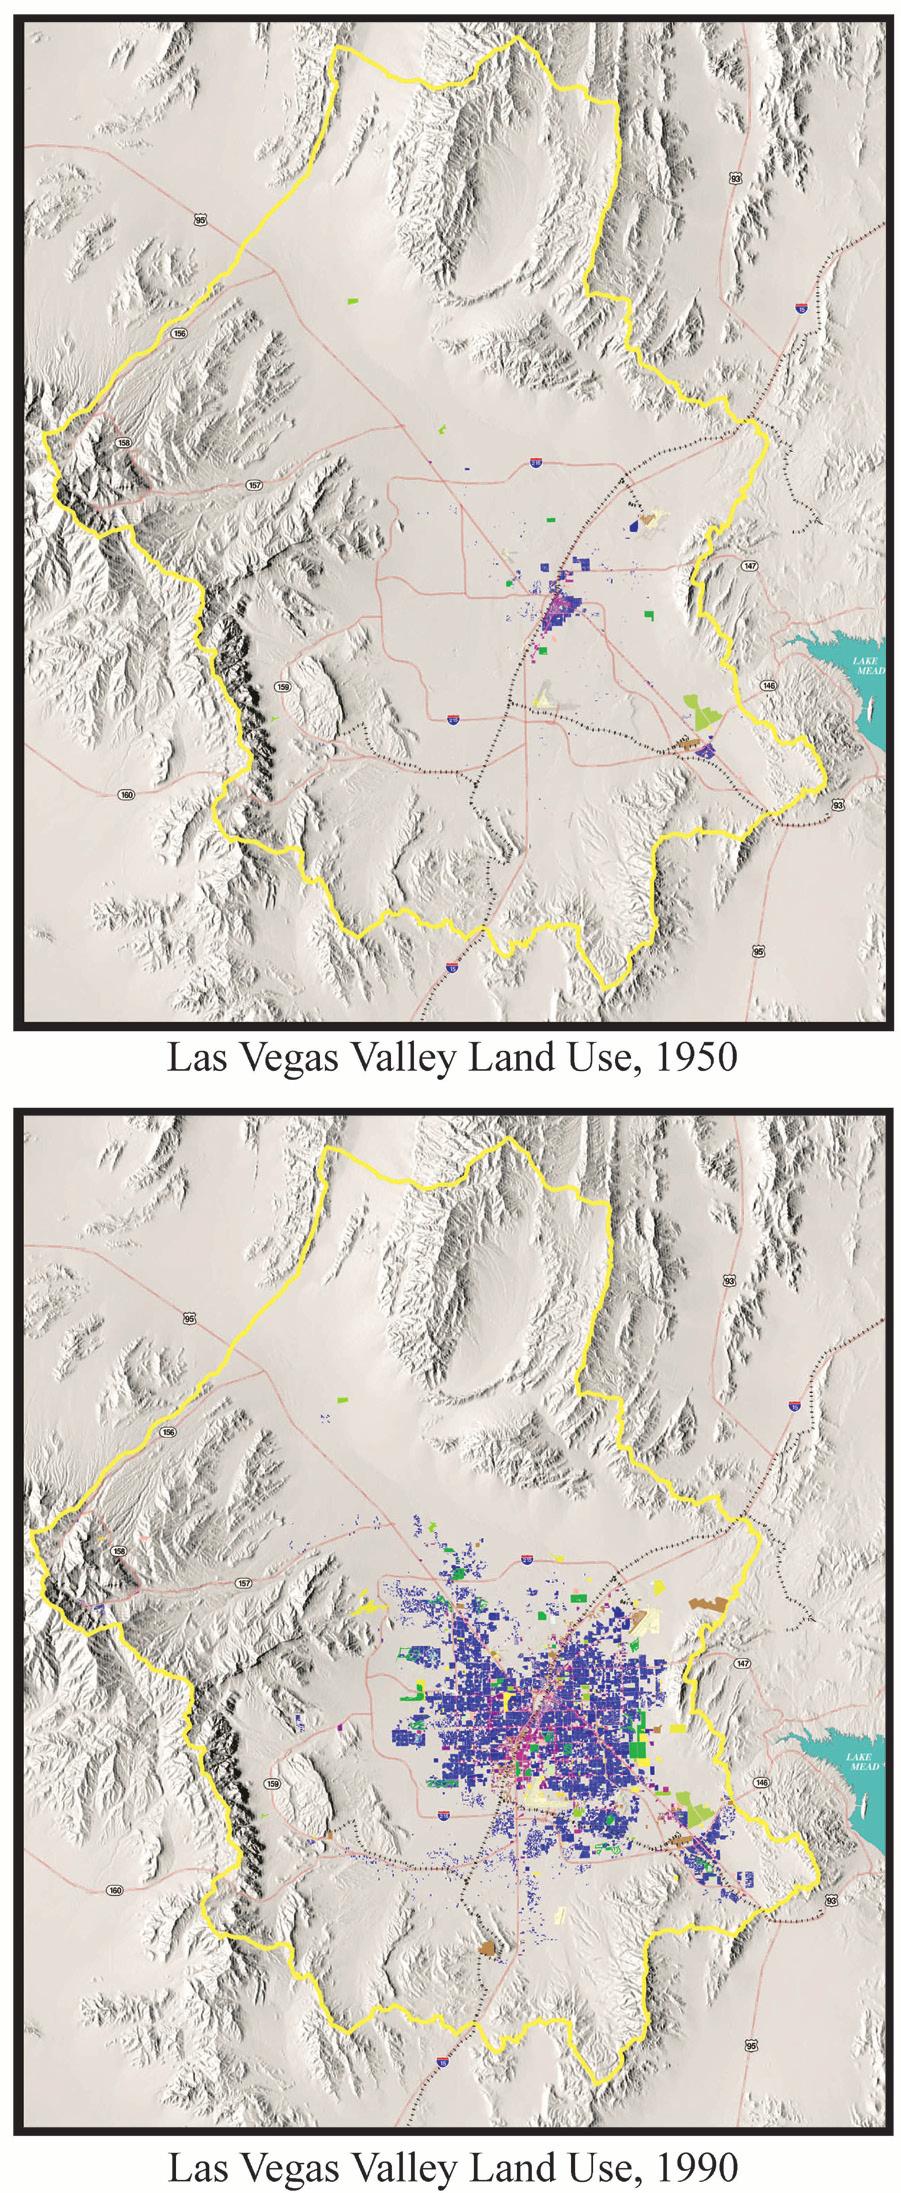 began in 1968 on the Southern Nevada Water System.10 The project would prove timely. By 1970, population in the Las Vegas Valley had more than doubled to 263,000.